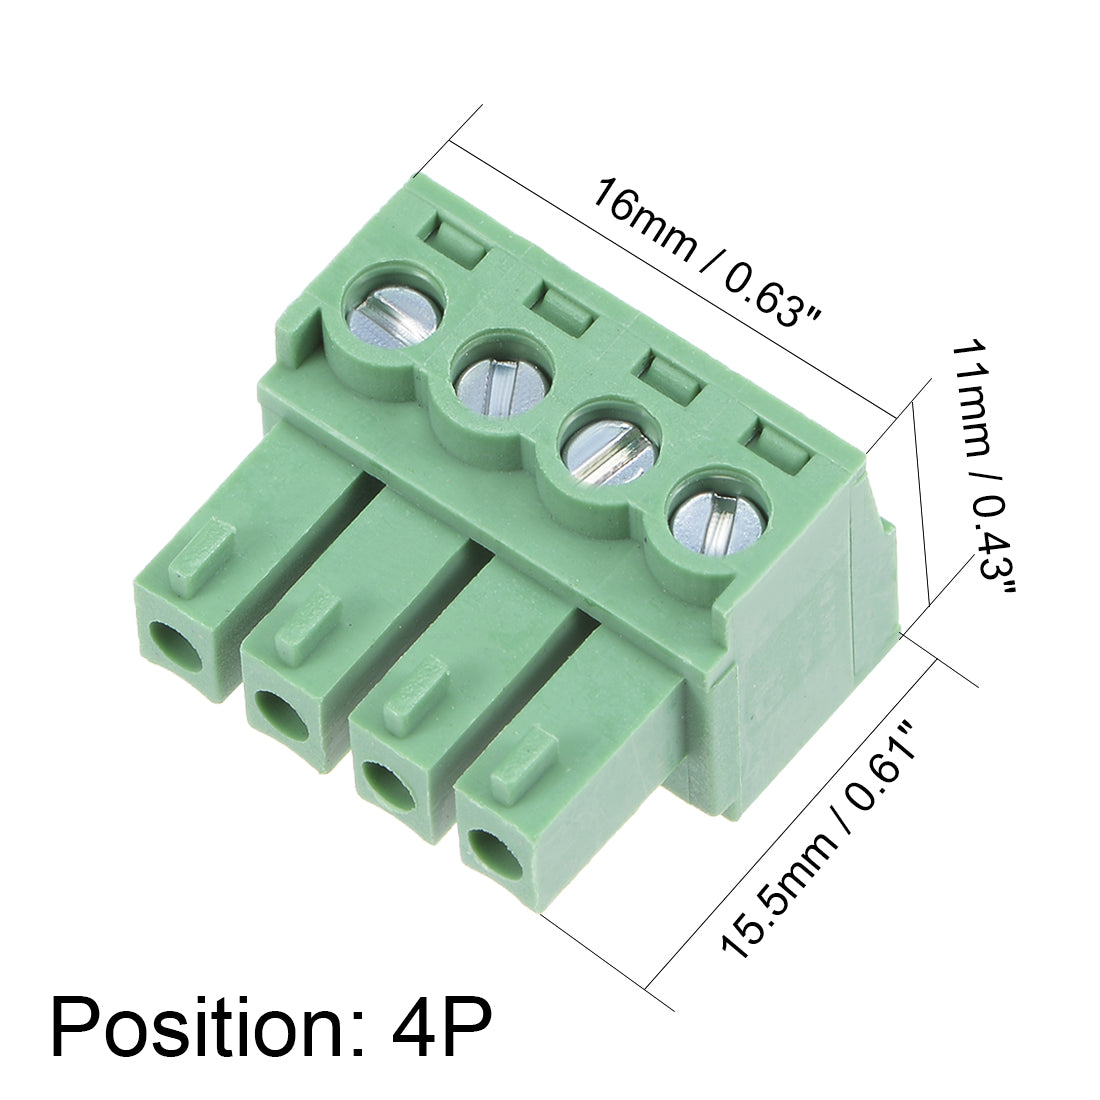 uxcell Uxcell 10Pcs AC 300V 8A 3.5mm Pitch 4P Needle Seat Insert-In PCB Terminal Block Green